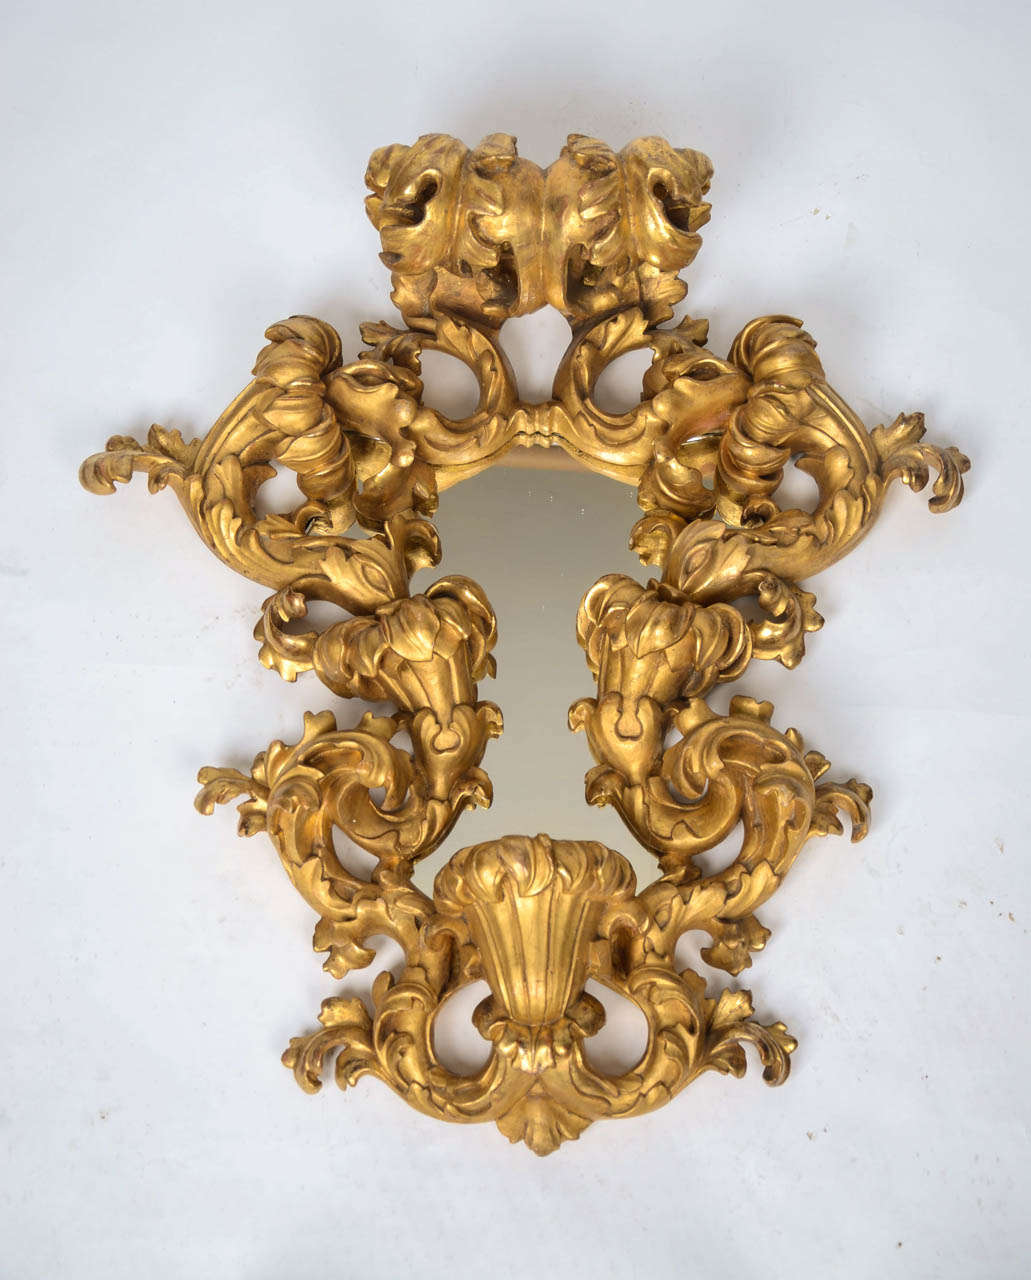 Particularly fine pair of hand-carved 19th century Florentine giltwood three-light girandoles in the Rococo manner, with elaborately shaped open scrolled acanthus leaf frames.
(Arms missing).